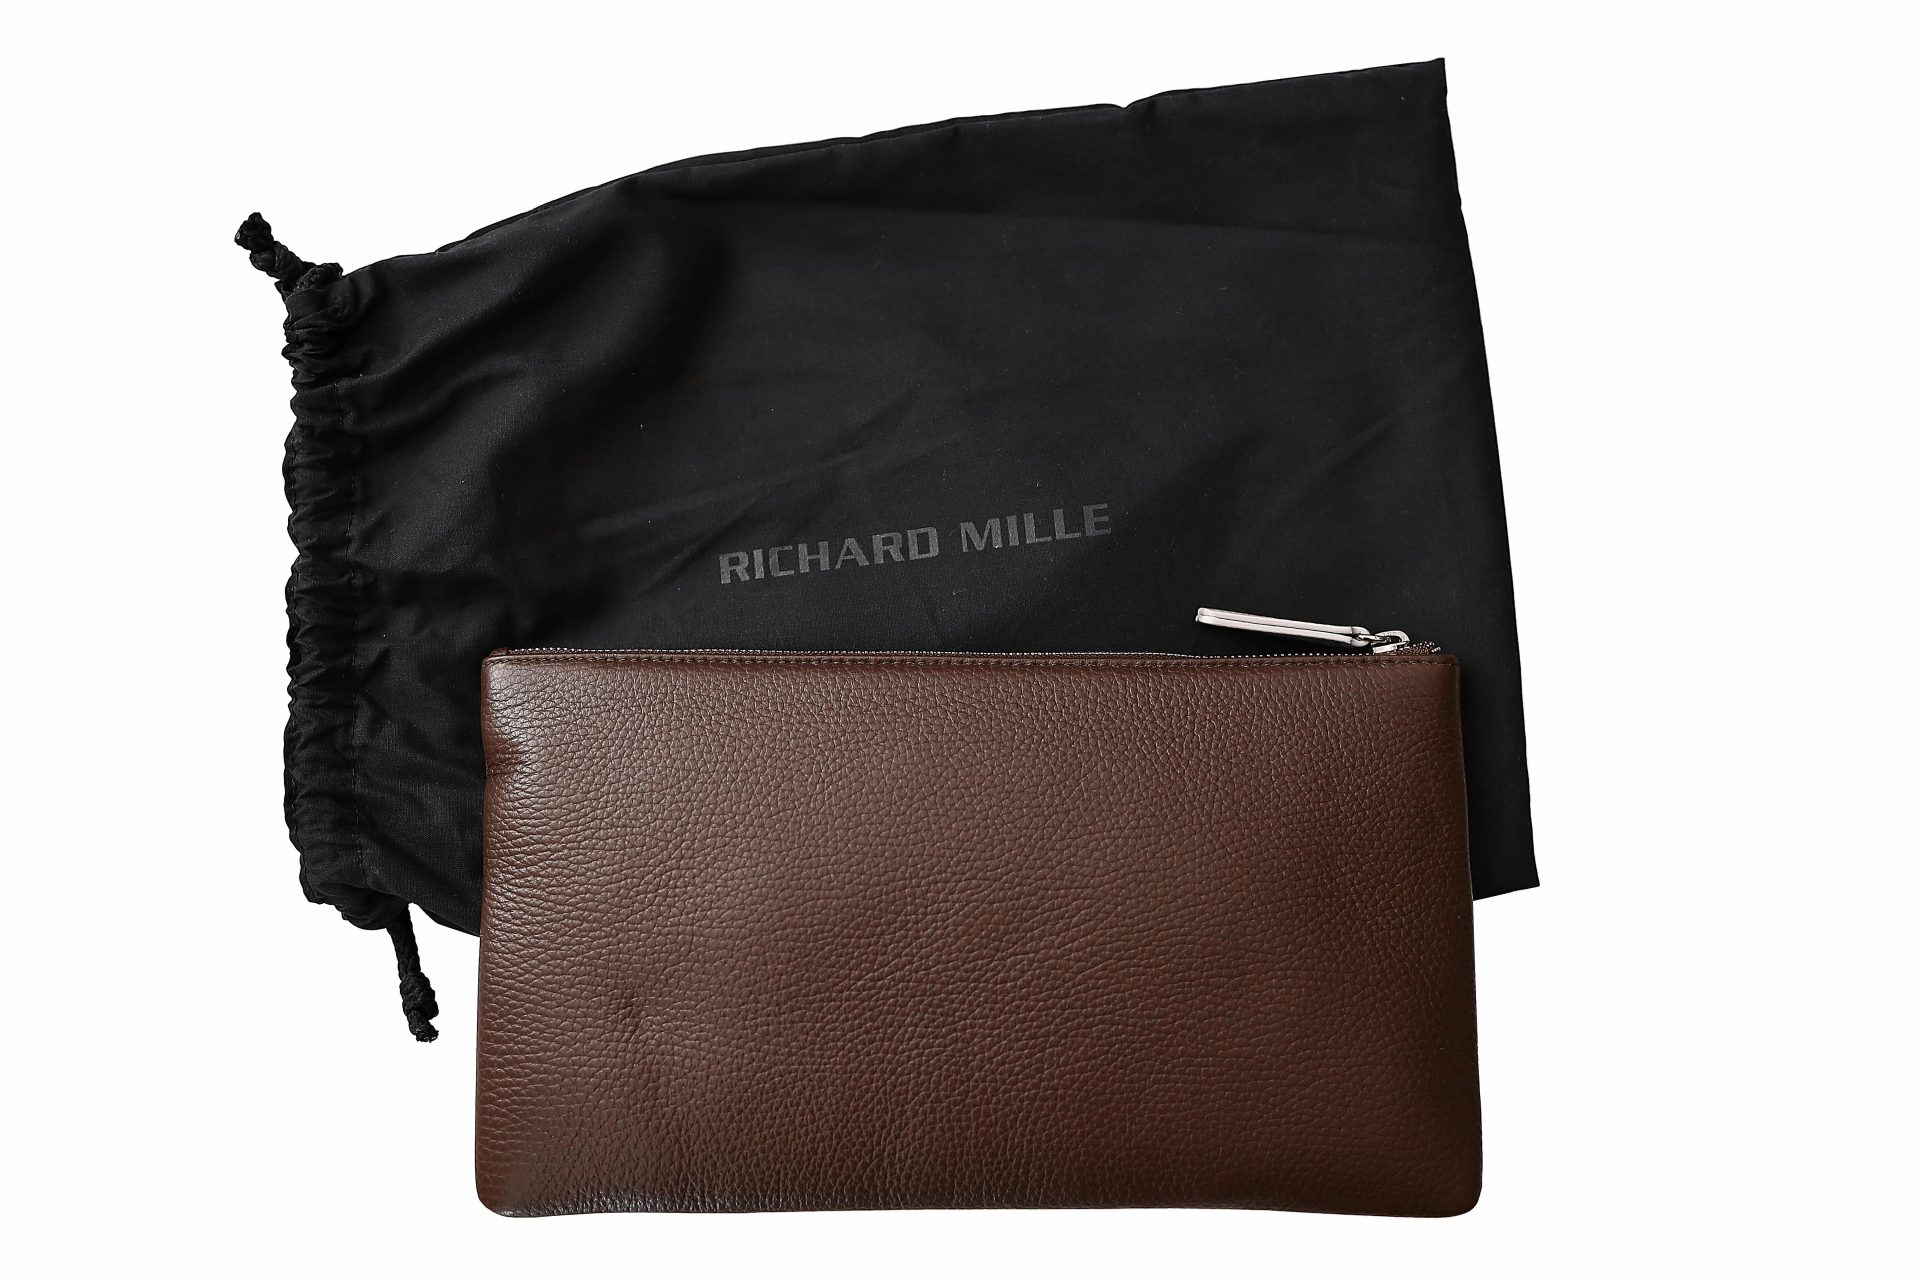 Richard Mille Leather Carrying Bag with Dust Cover - Rare Watch Parts